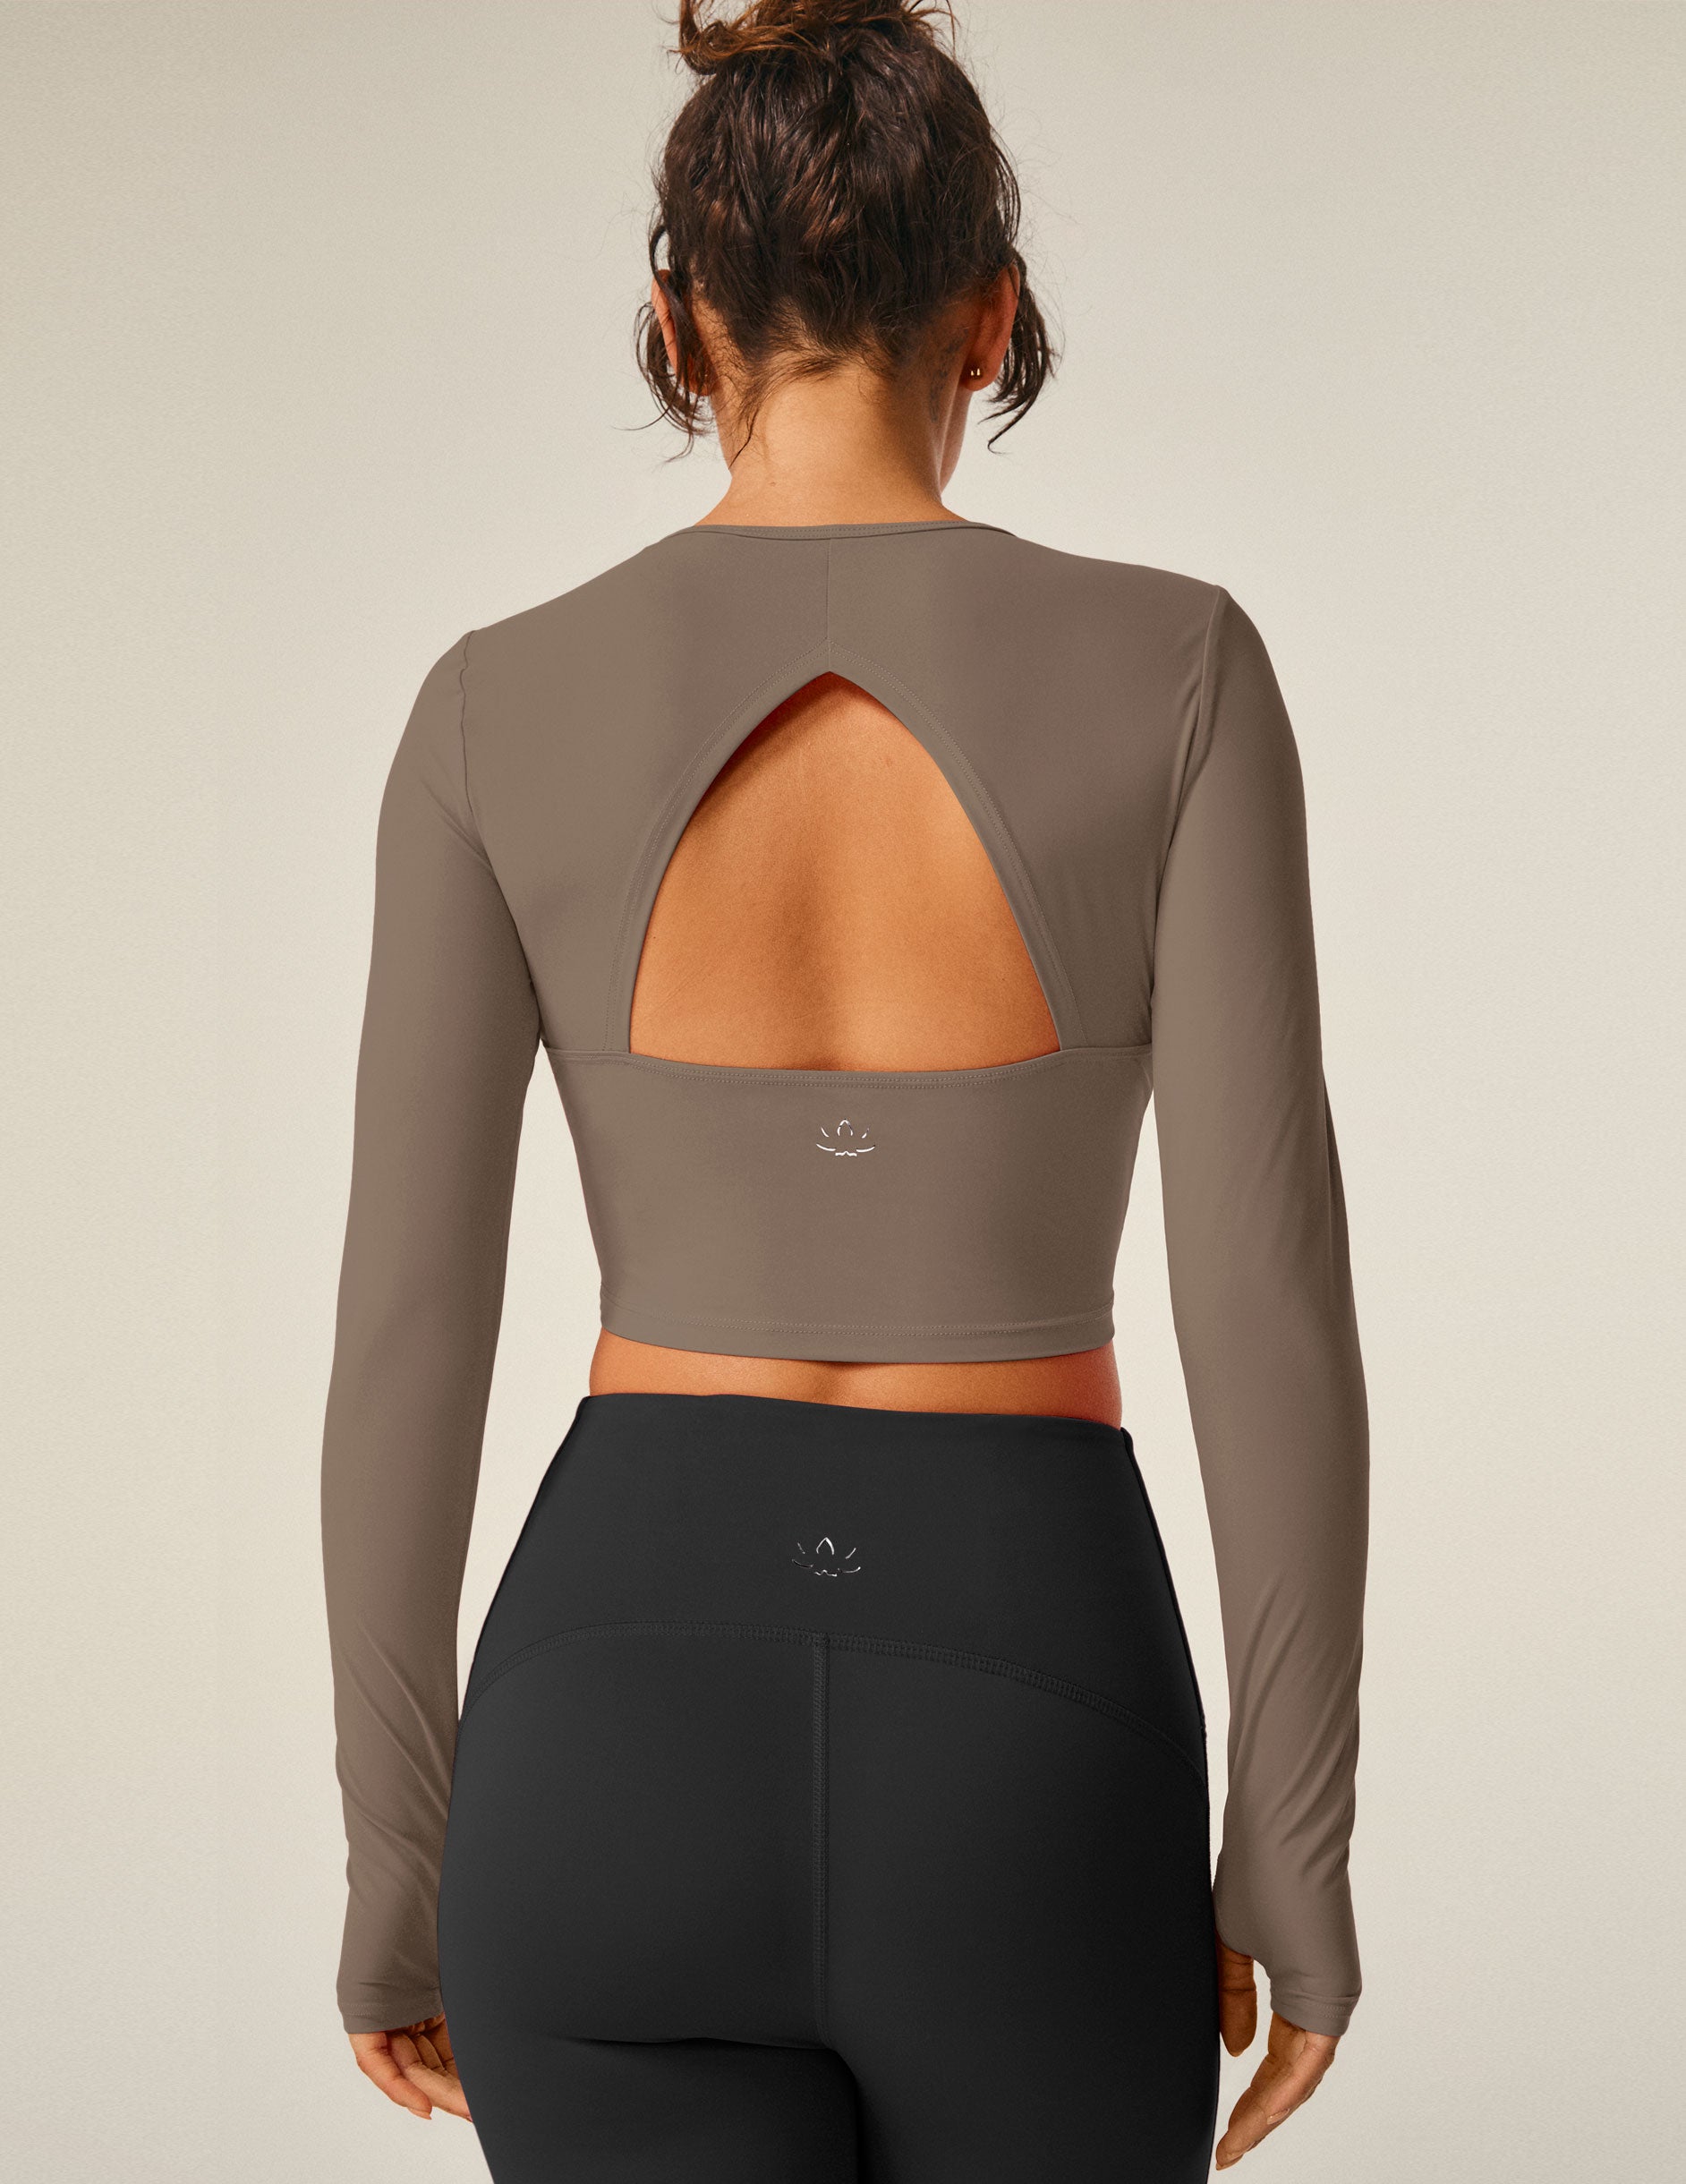 brown cropped long sleeve pullover with a back open detail and thumb holes.